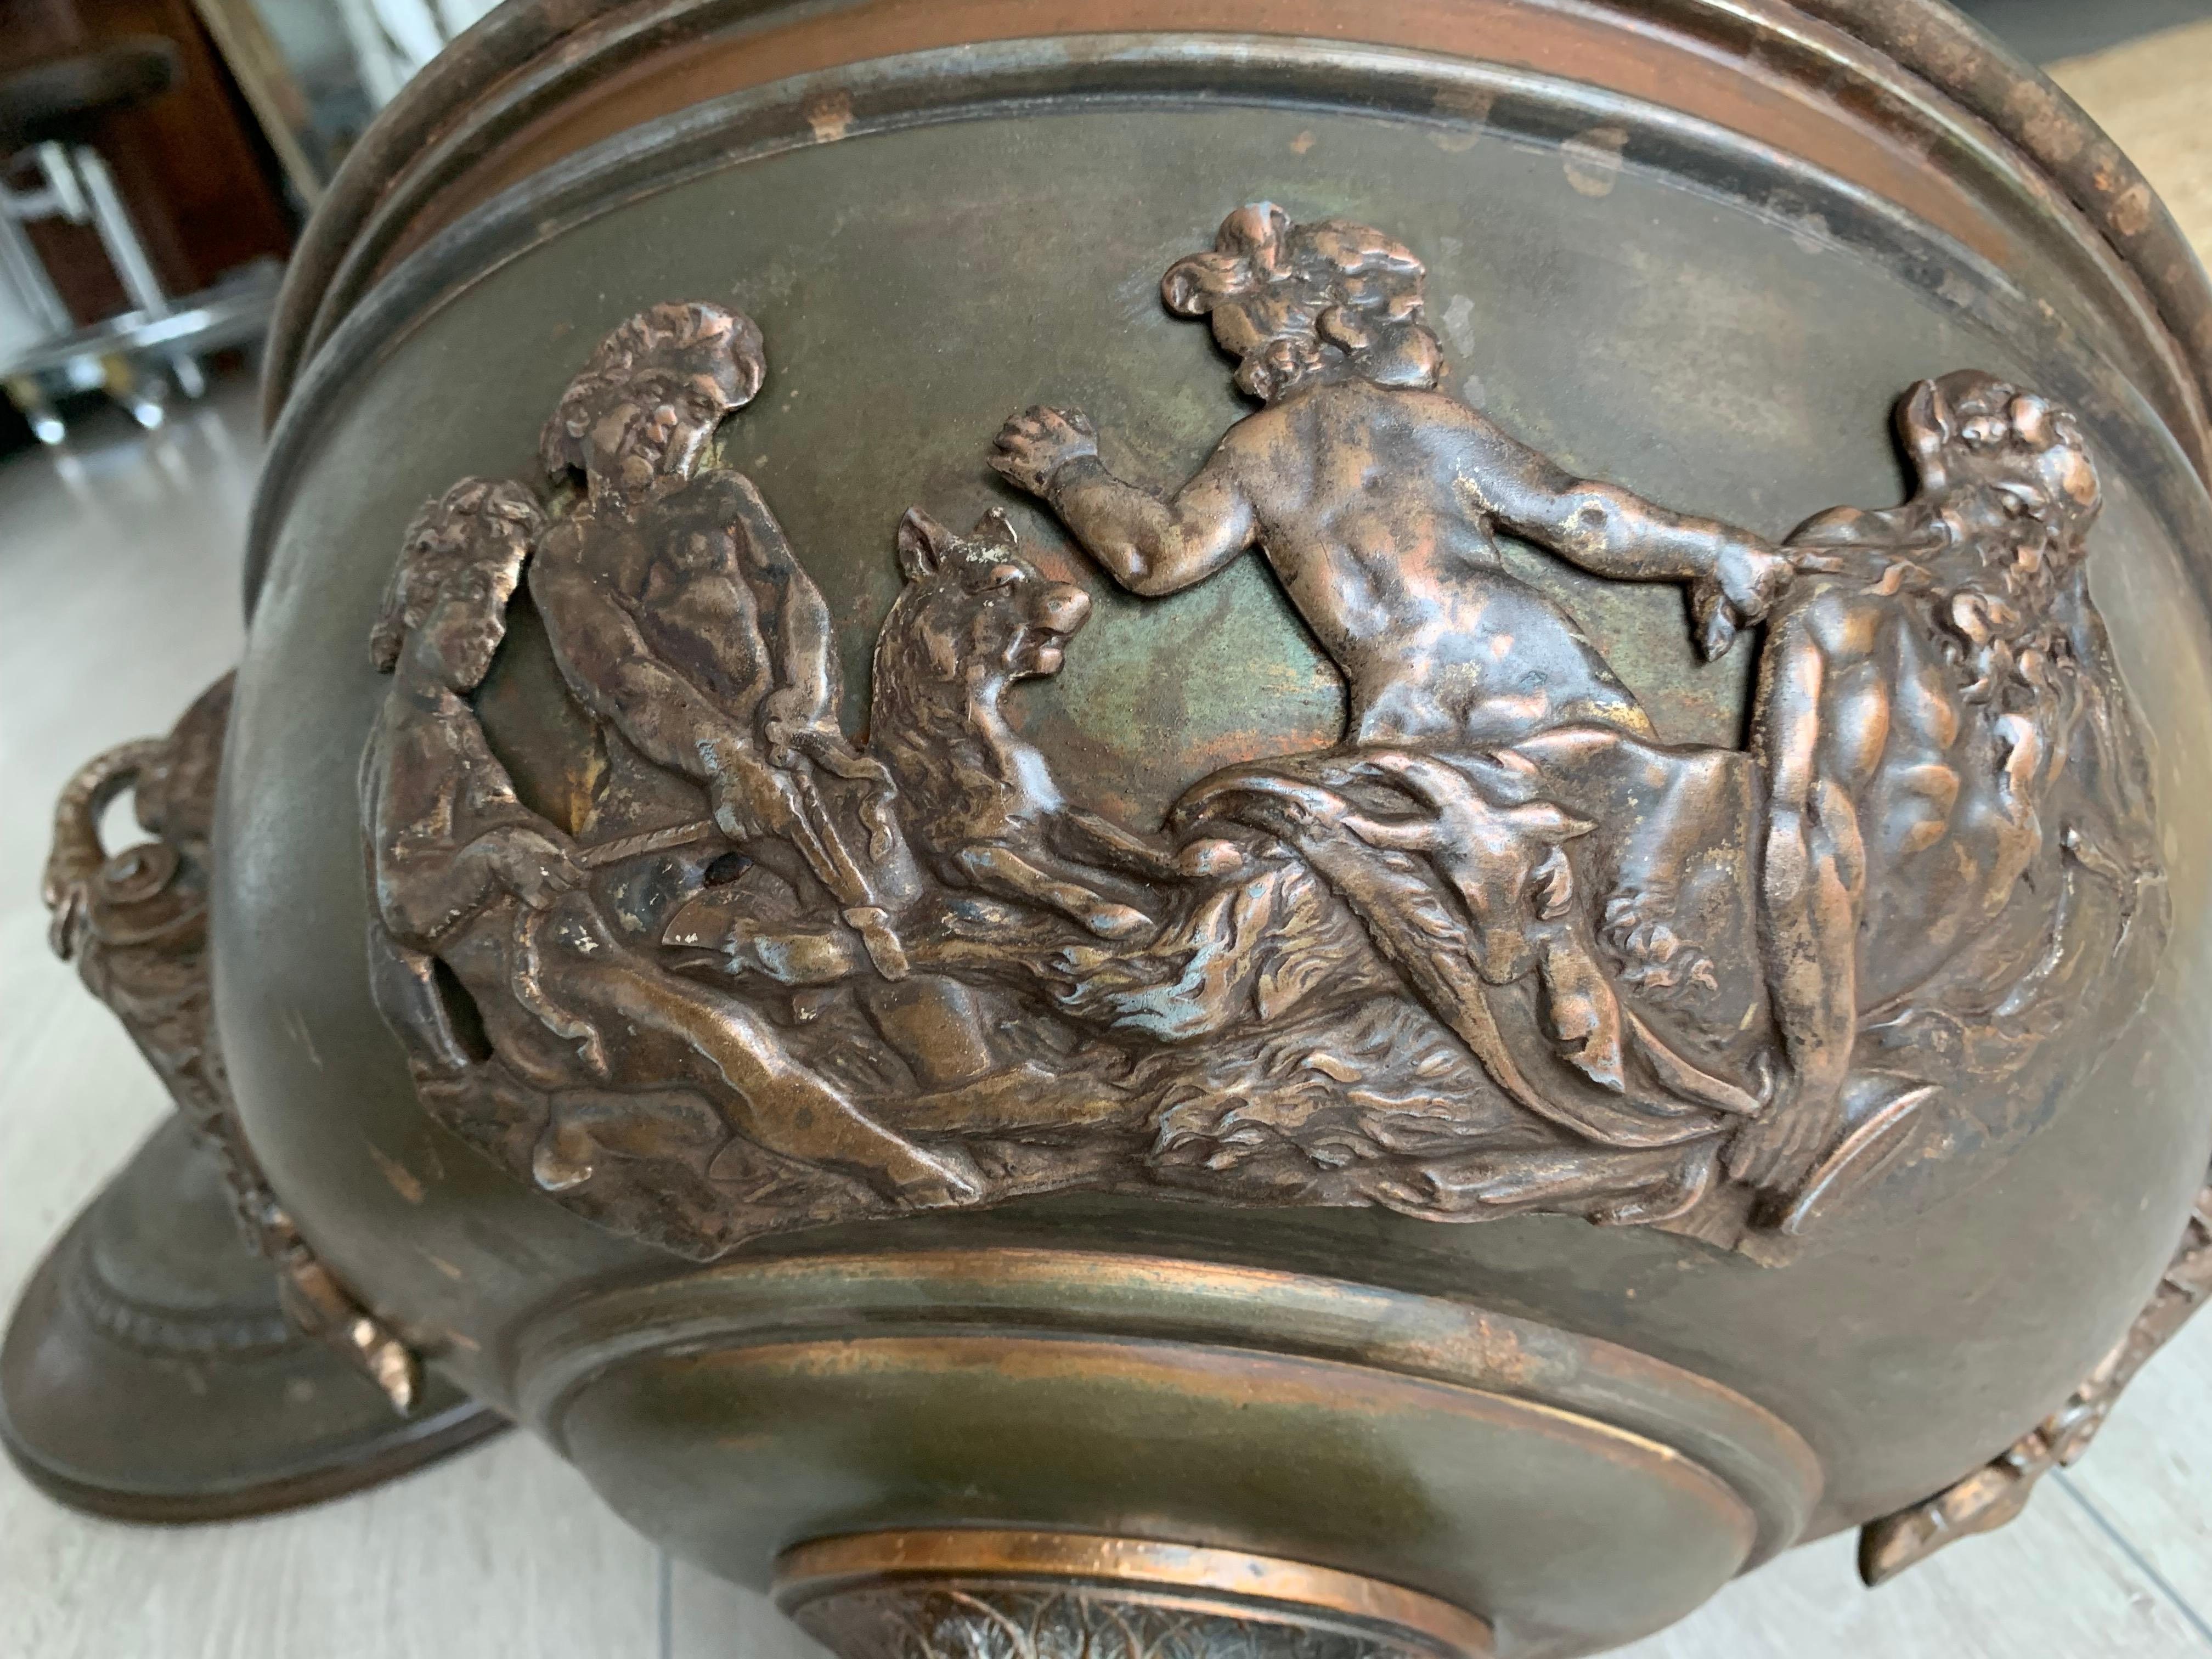 Decorative ash or coal bucket with fauns, putti and various mythological creatures.

If you are a collector of rare and sculptural antiques then this possibly unique bucket could be gracing your fireplace soon. The artisan metal worker who